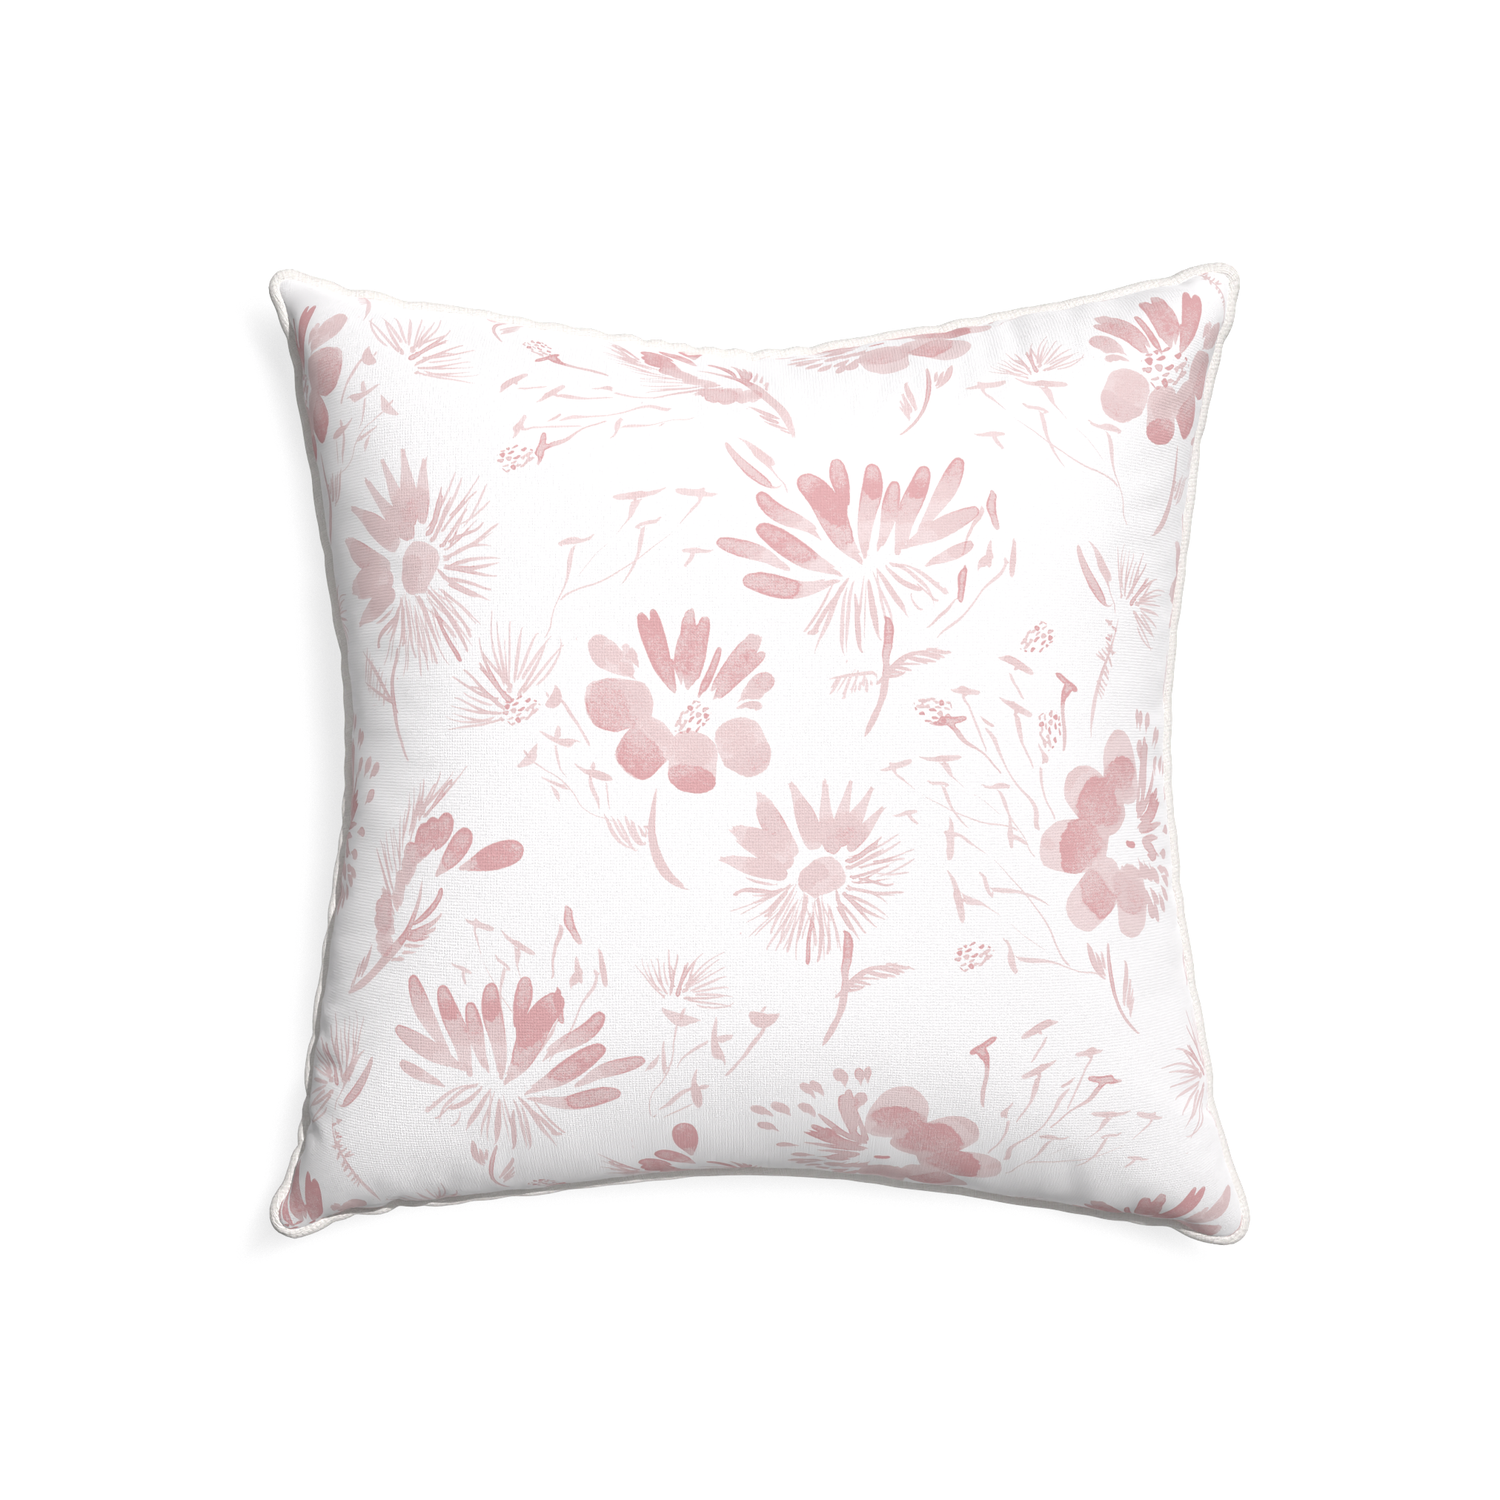 22-square blake custom pink floralpillow with snow piping on white background